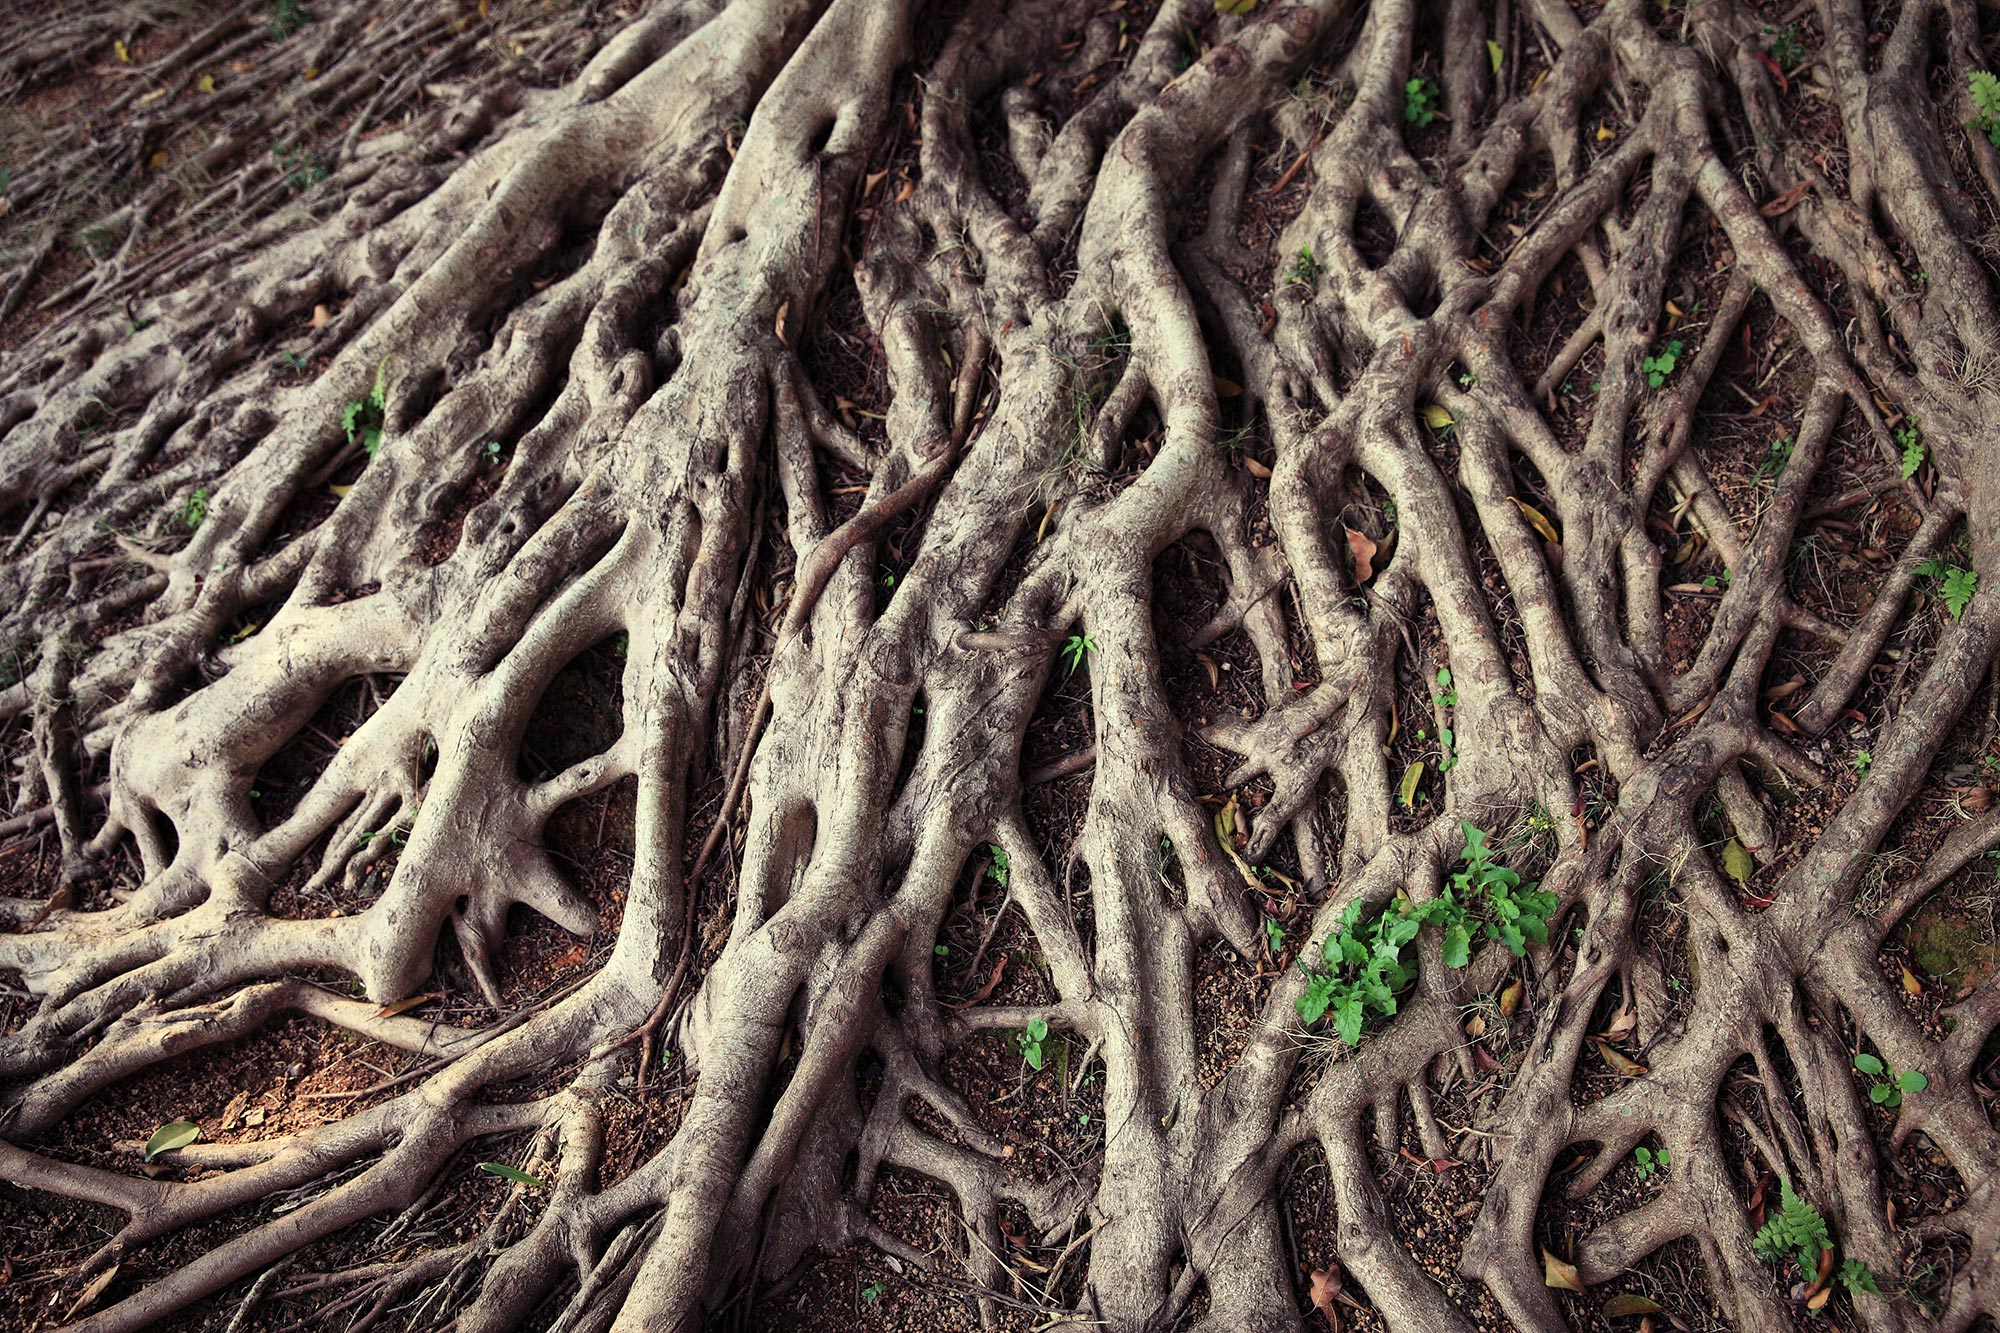 Mass Extinctions May Have Been Driven by the Evolution of Tree Roots